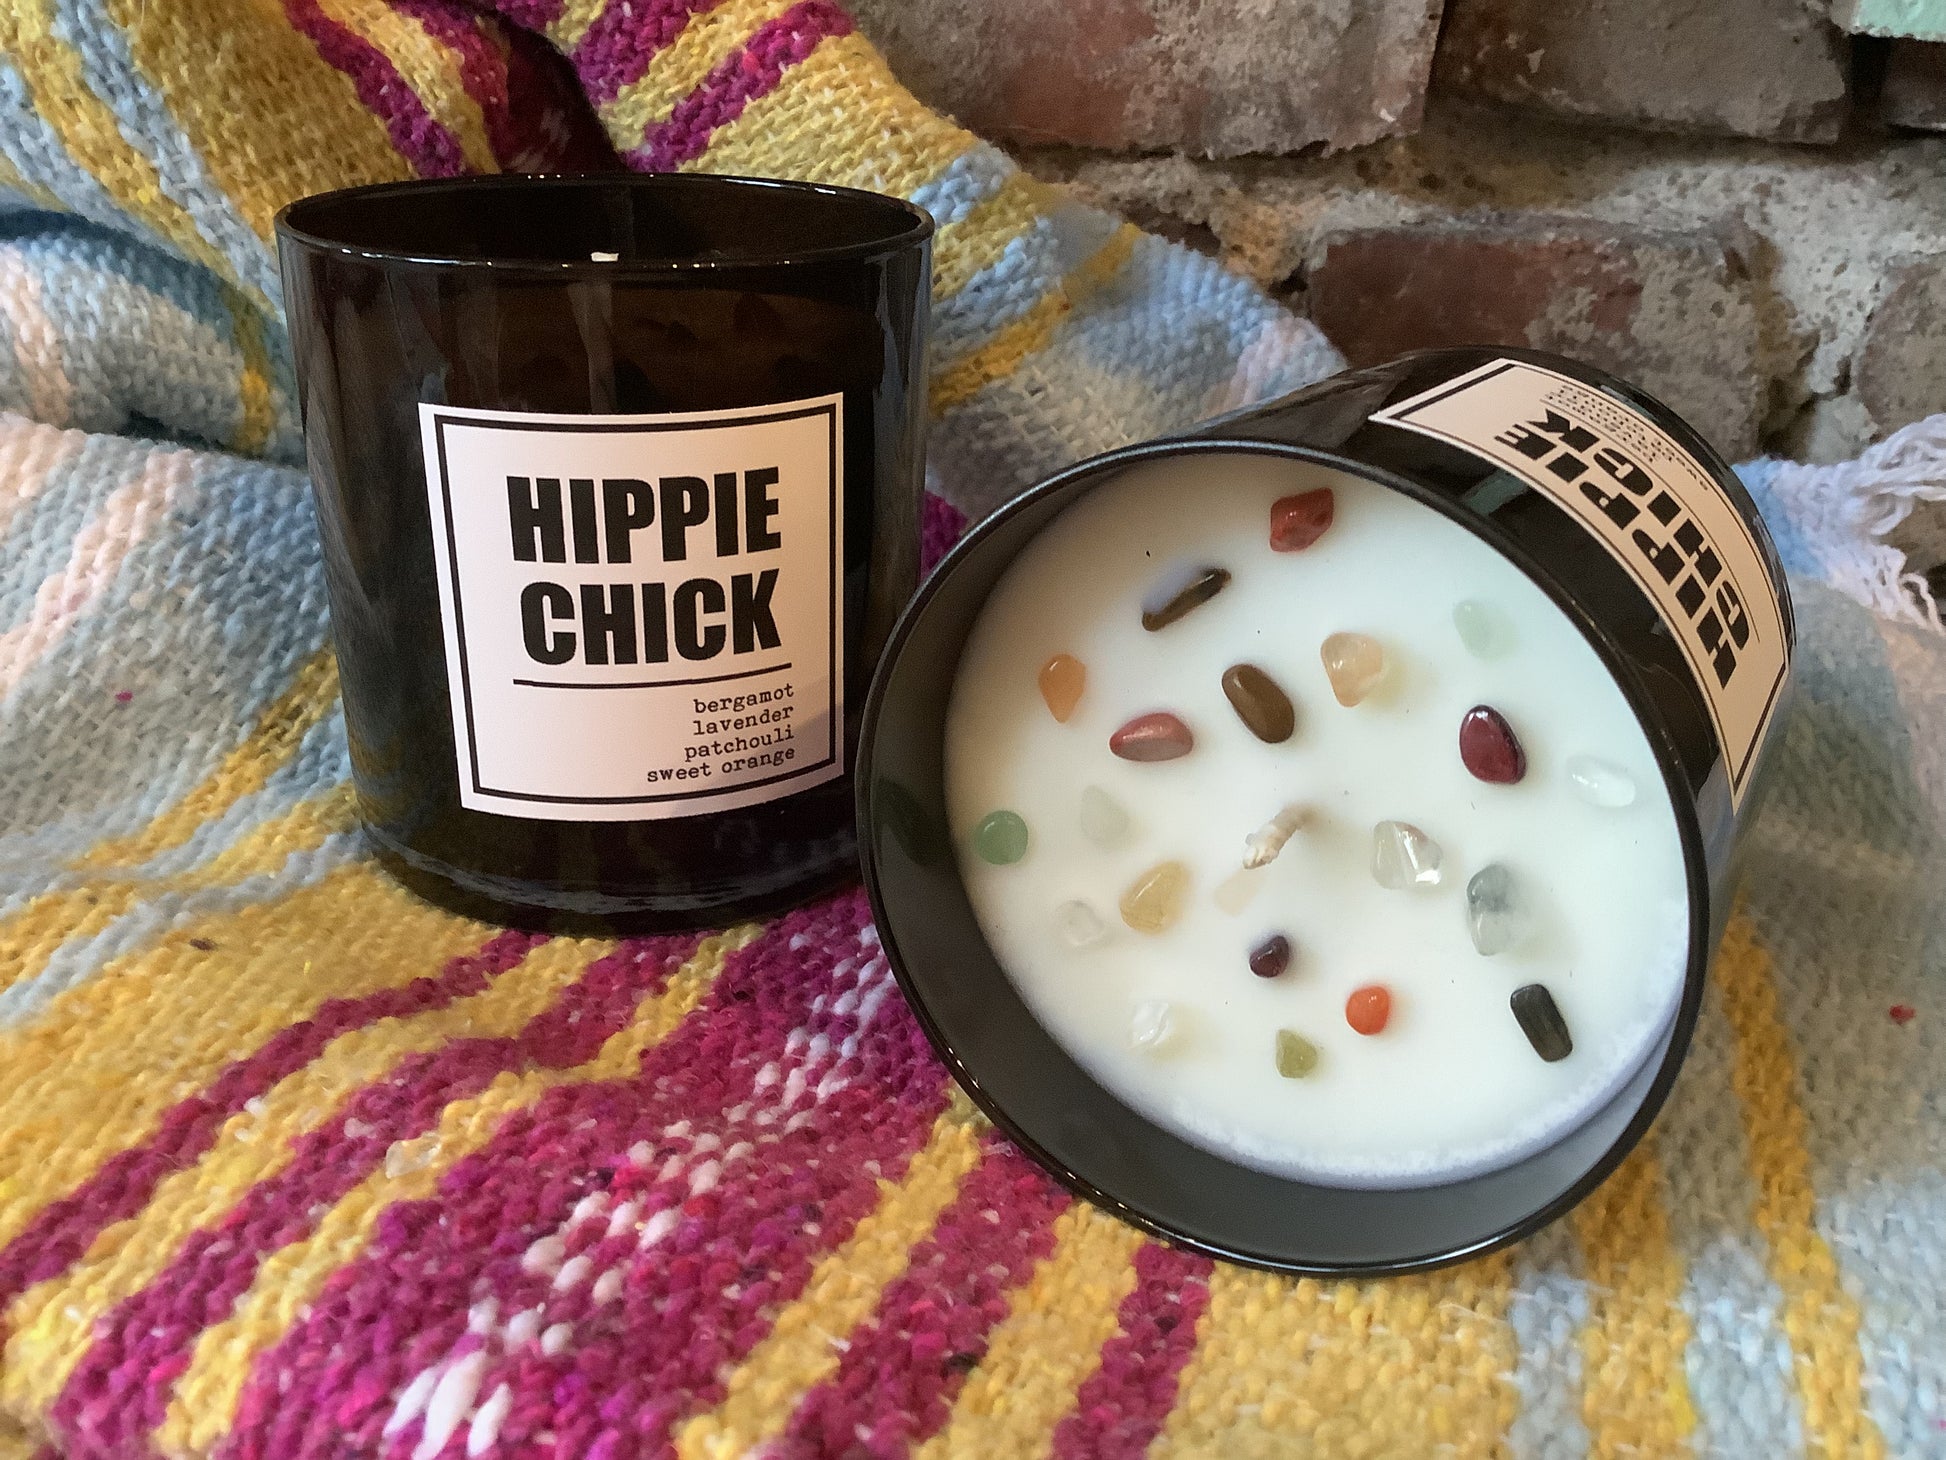 Hippie Chick candles